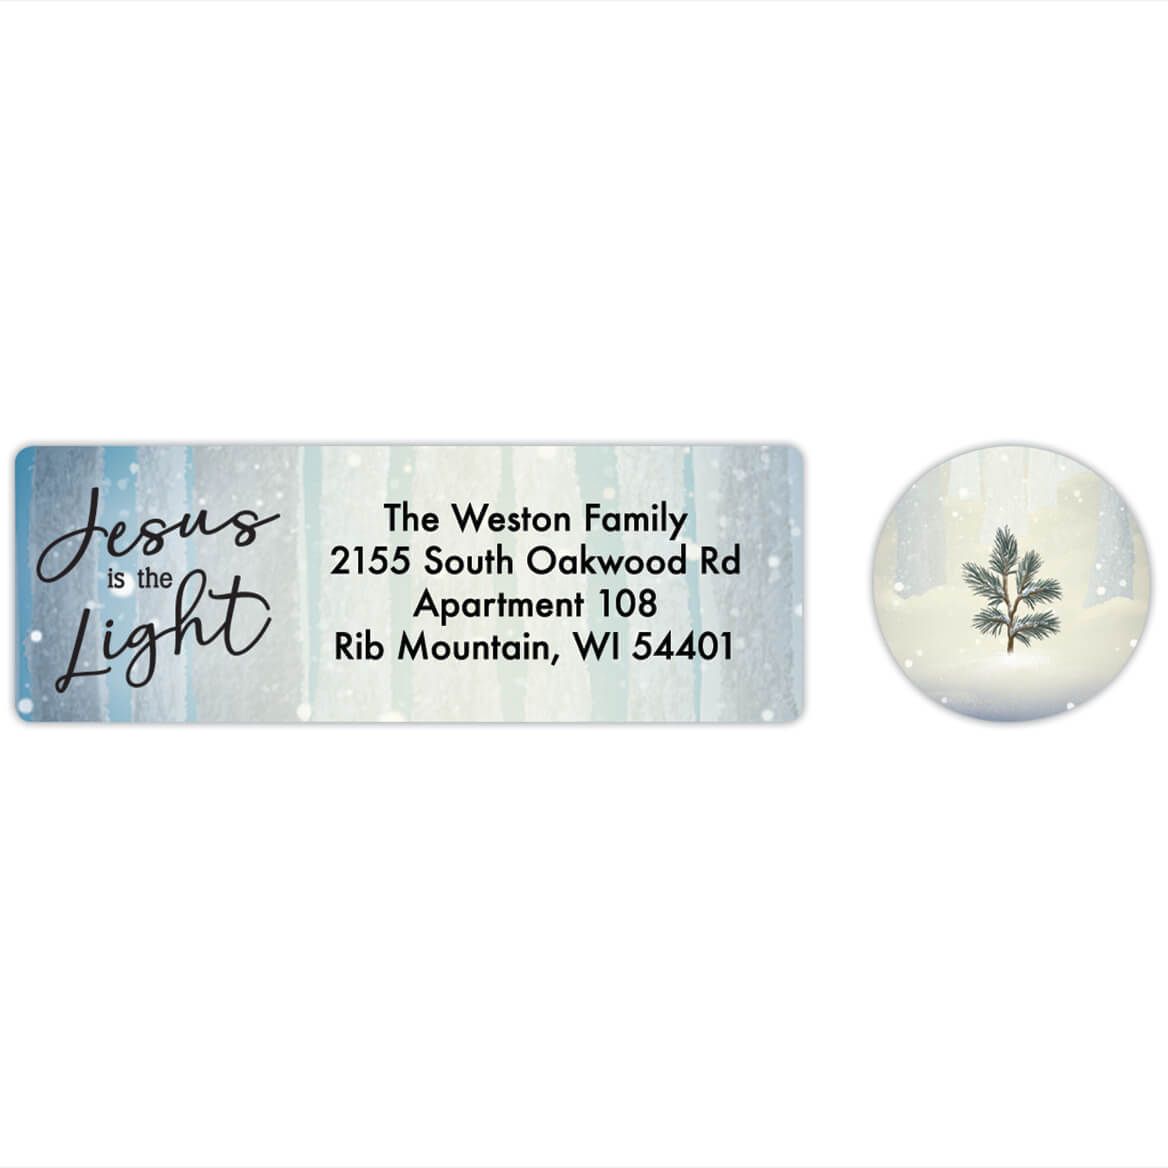 Personalized He is the Light Labels & Envelope Seals 20 + '-' + 368275